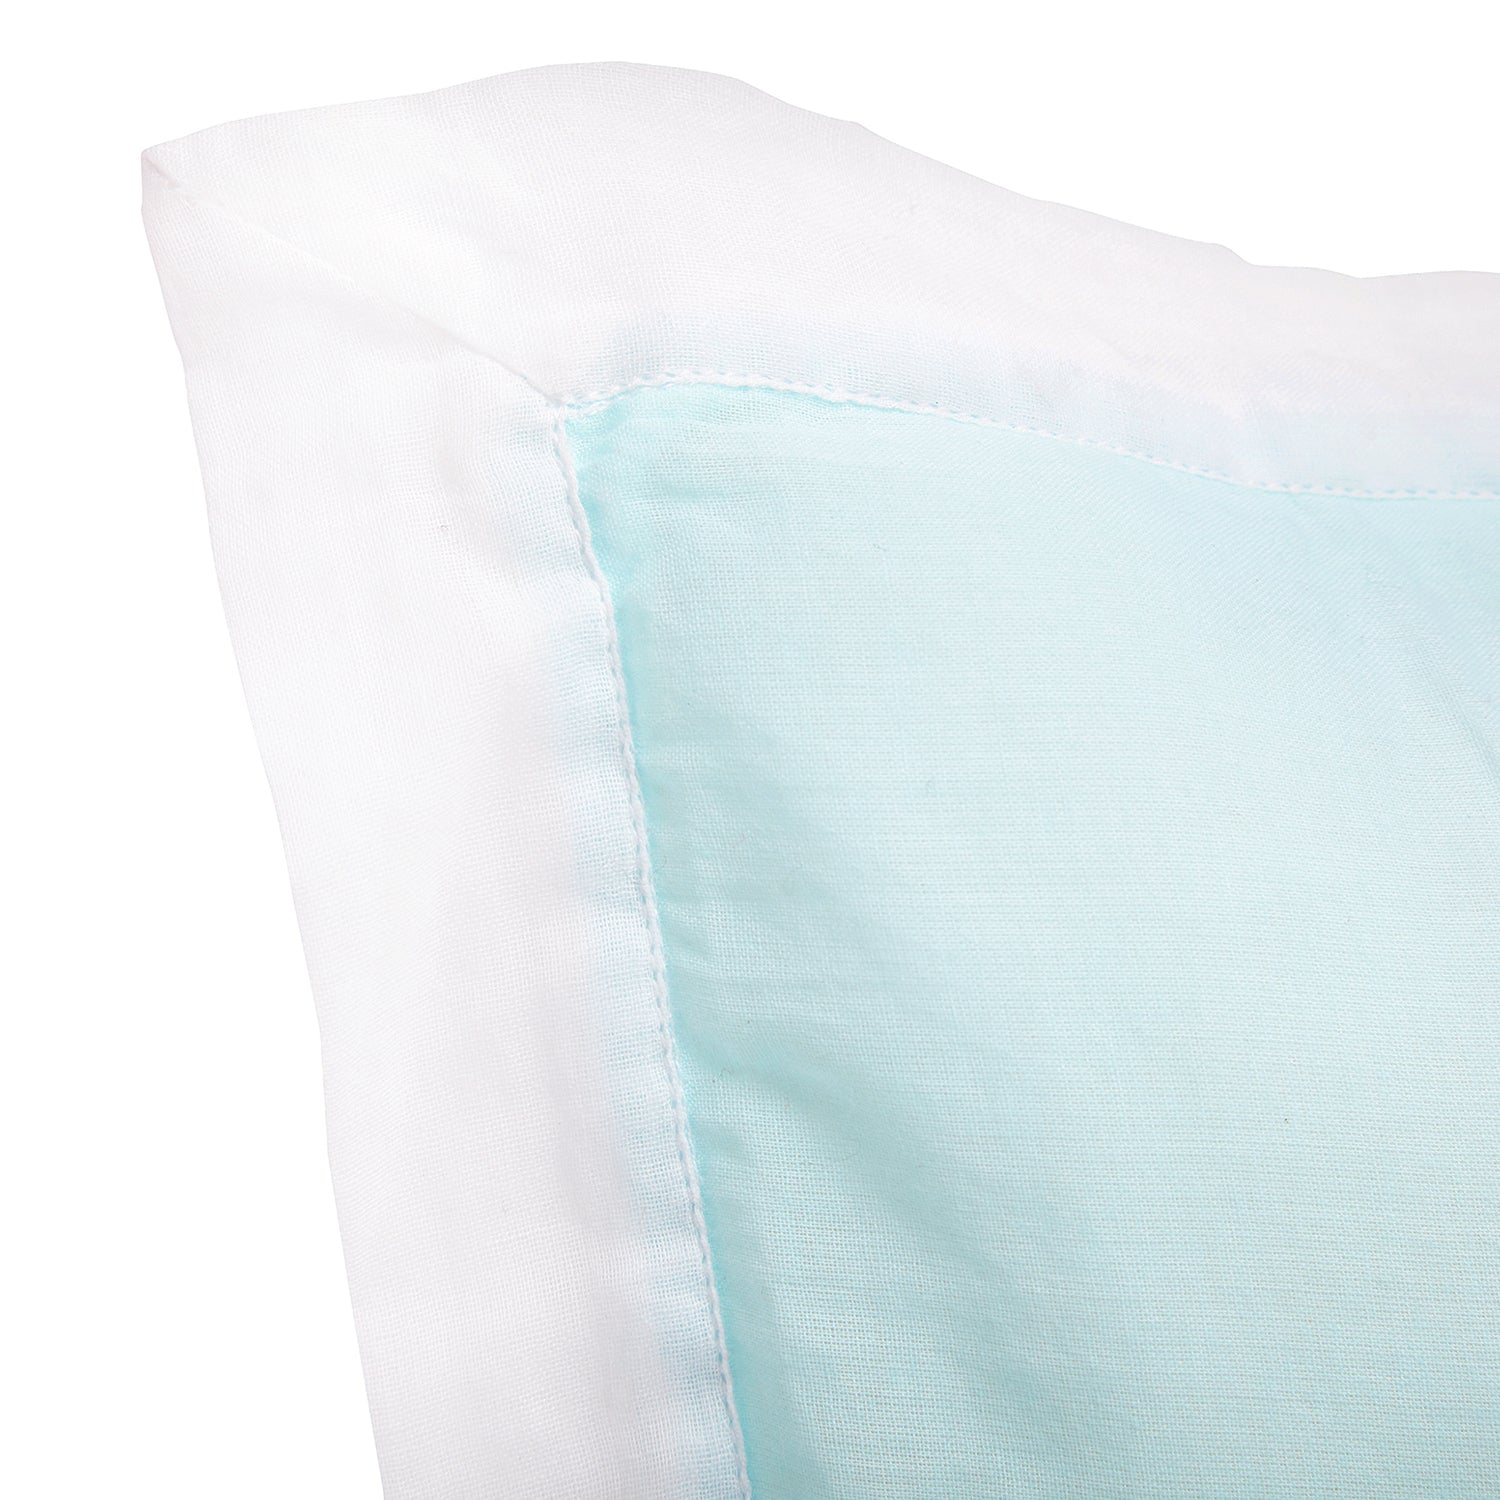 The White Cradle Cot Pillow + 2 Bolsters Set with Fillers - Organic Cotton Fabric, Softest Fiber Filling, Protective Comfort - Shipwheel